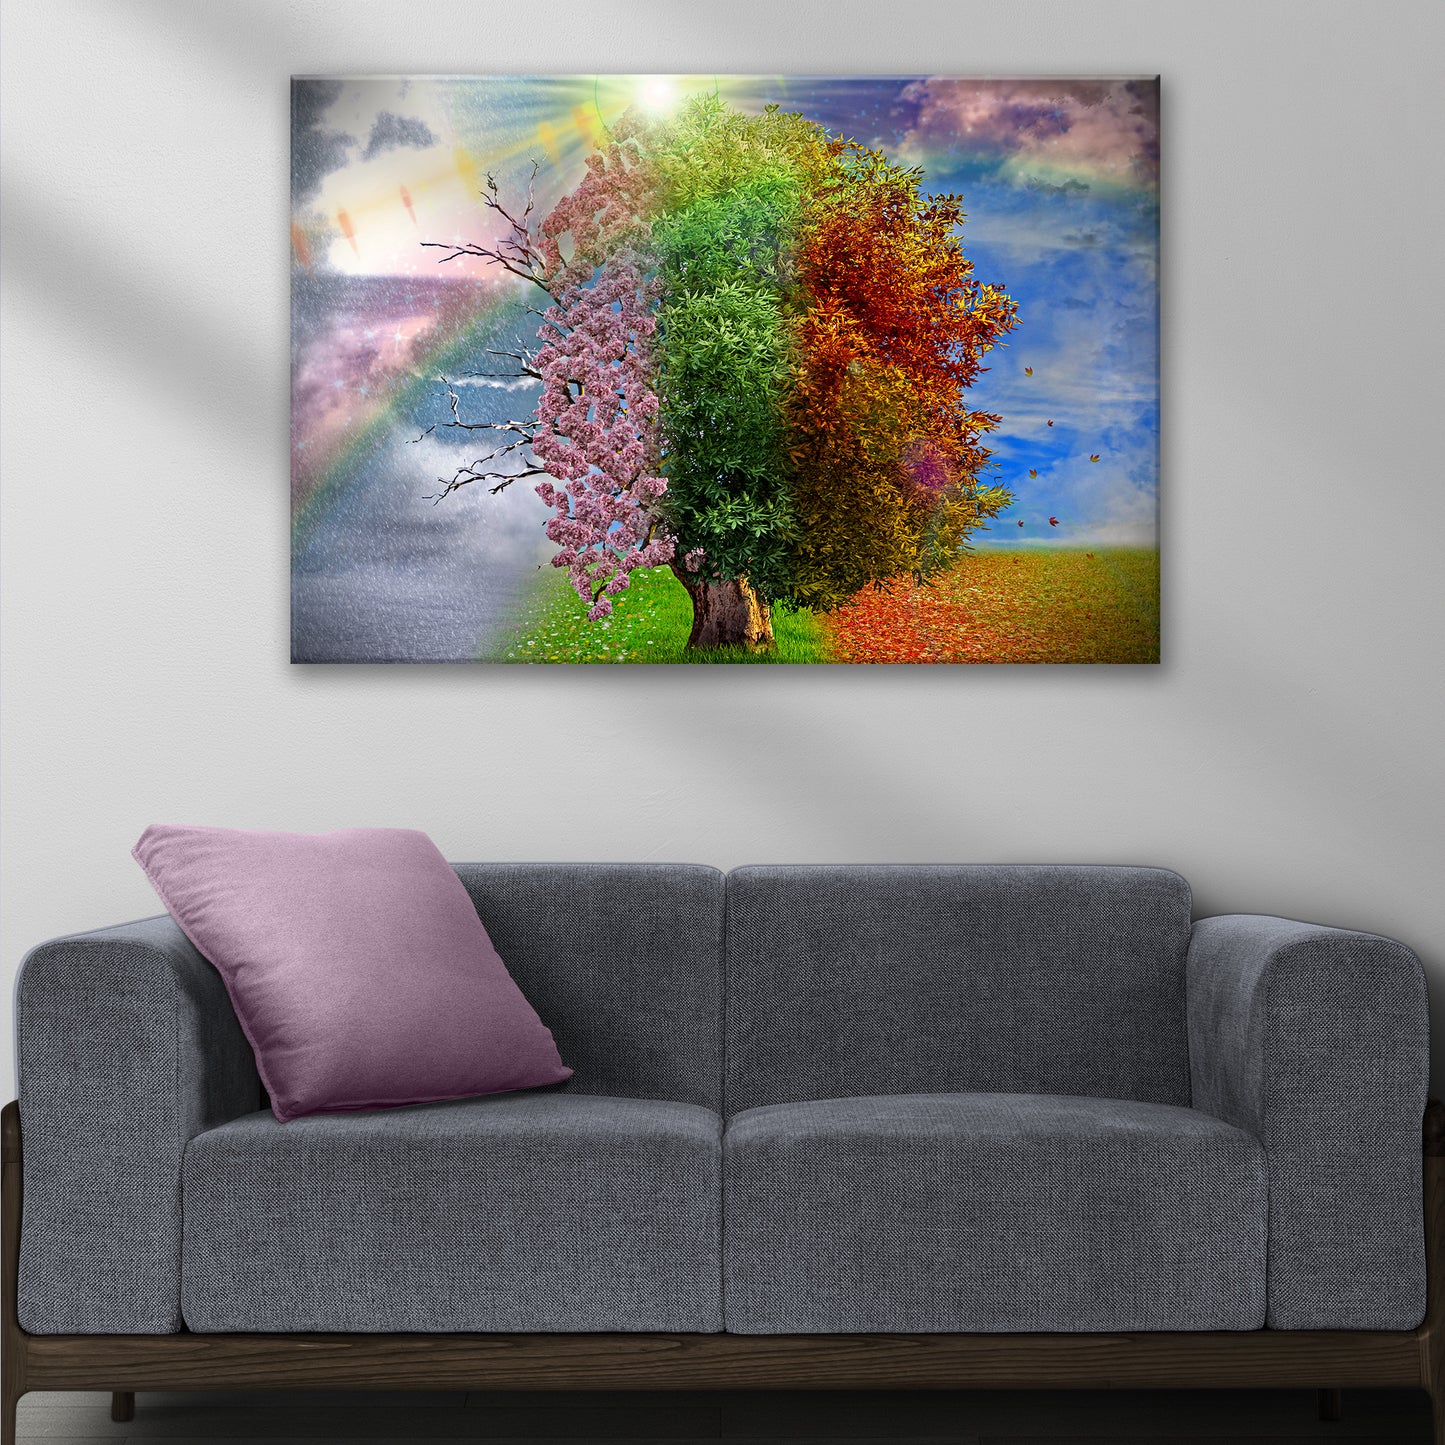 Four Seasons Of A Tree Canvas Wall Art Style 2 - Image by Tailored Canvases